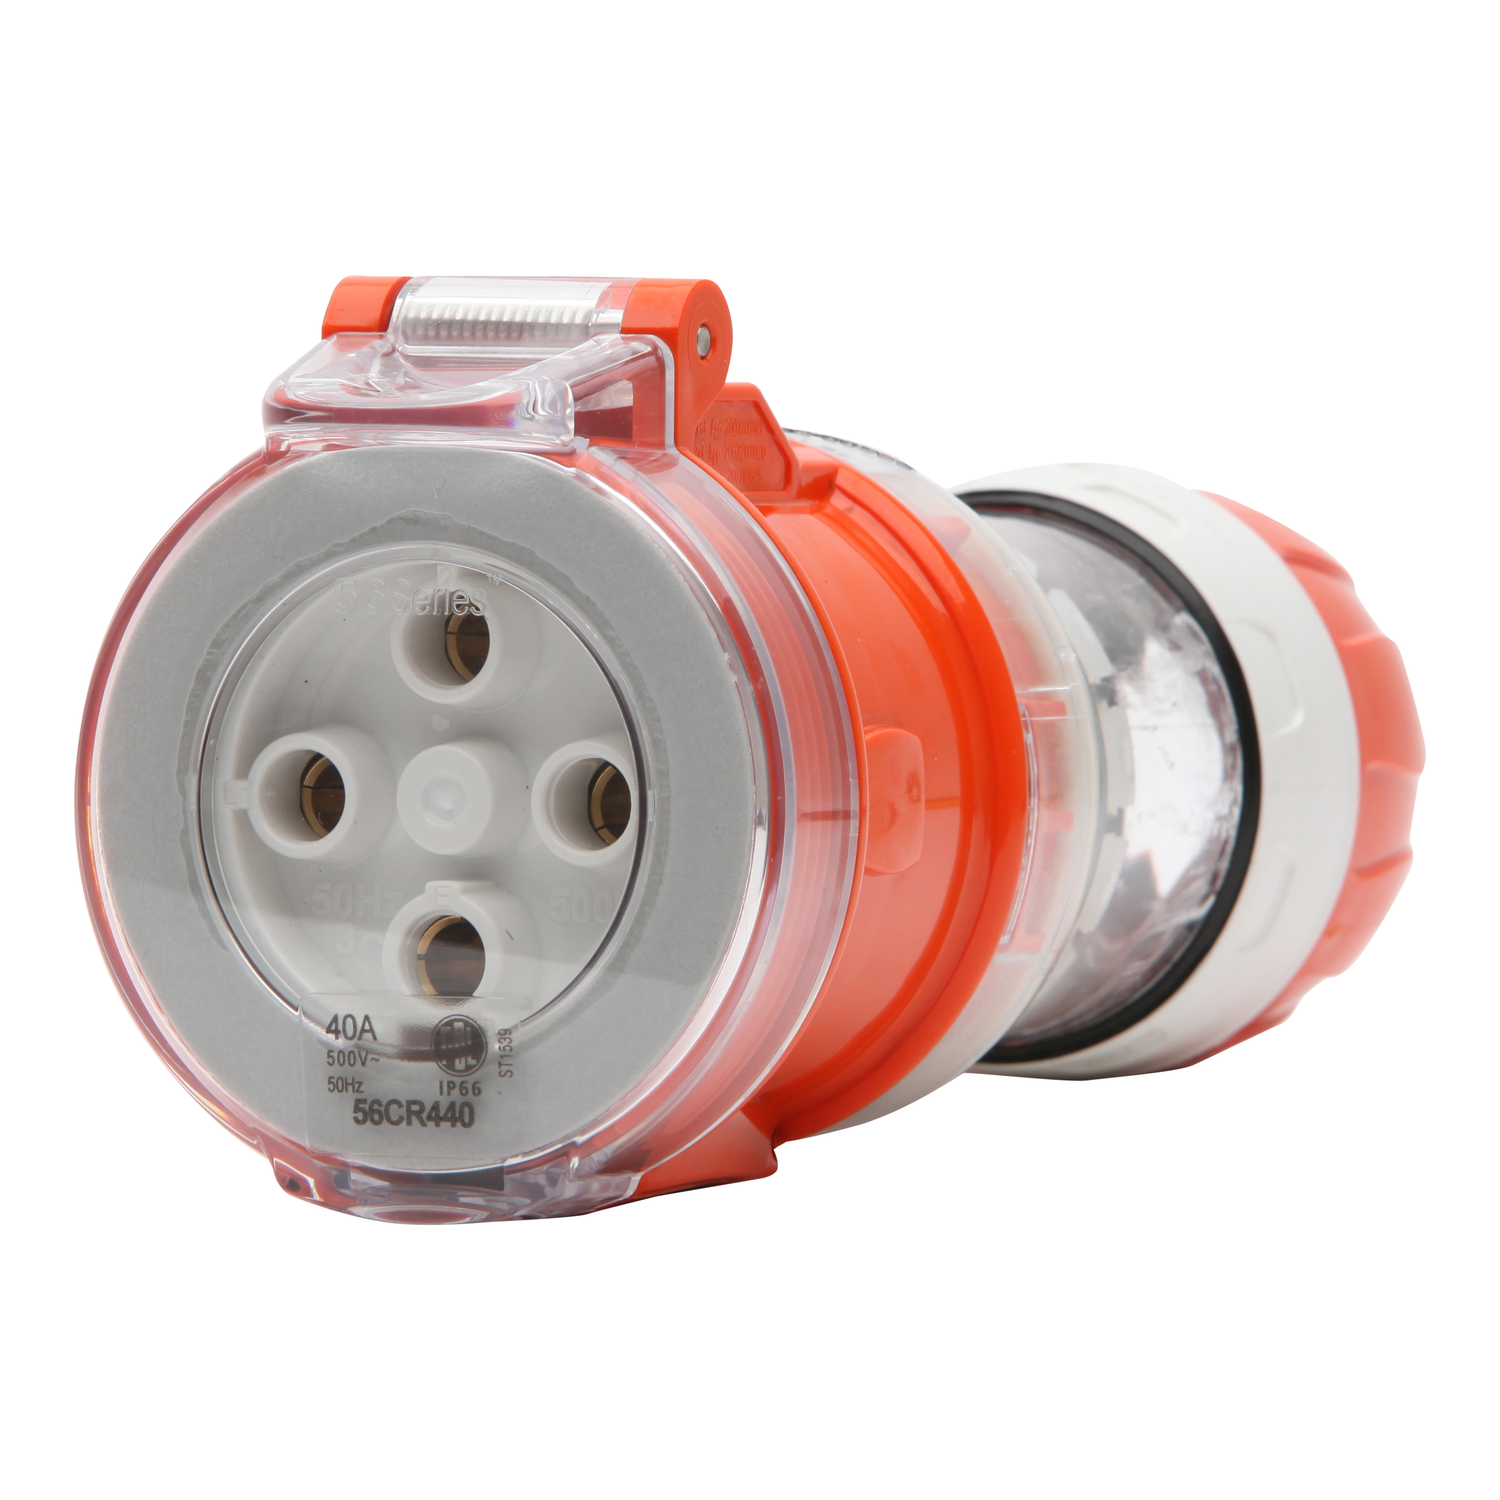 PDL 56 Series - Cord Connector Extension Socket 40A 500V 4-Round Pin IP66 - Orange